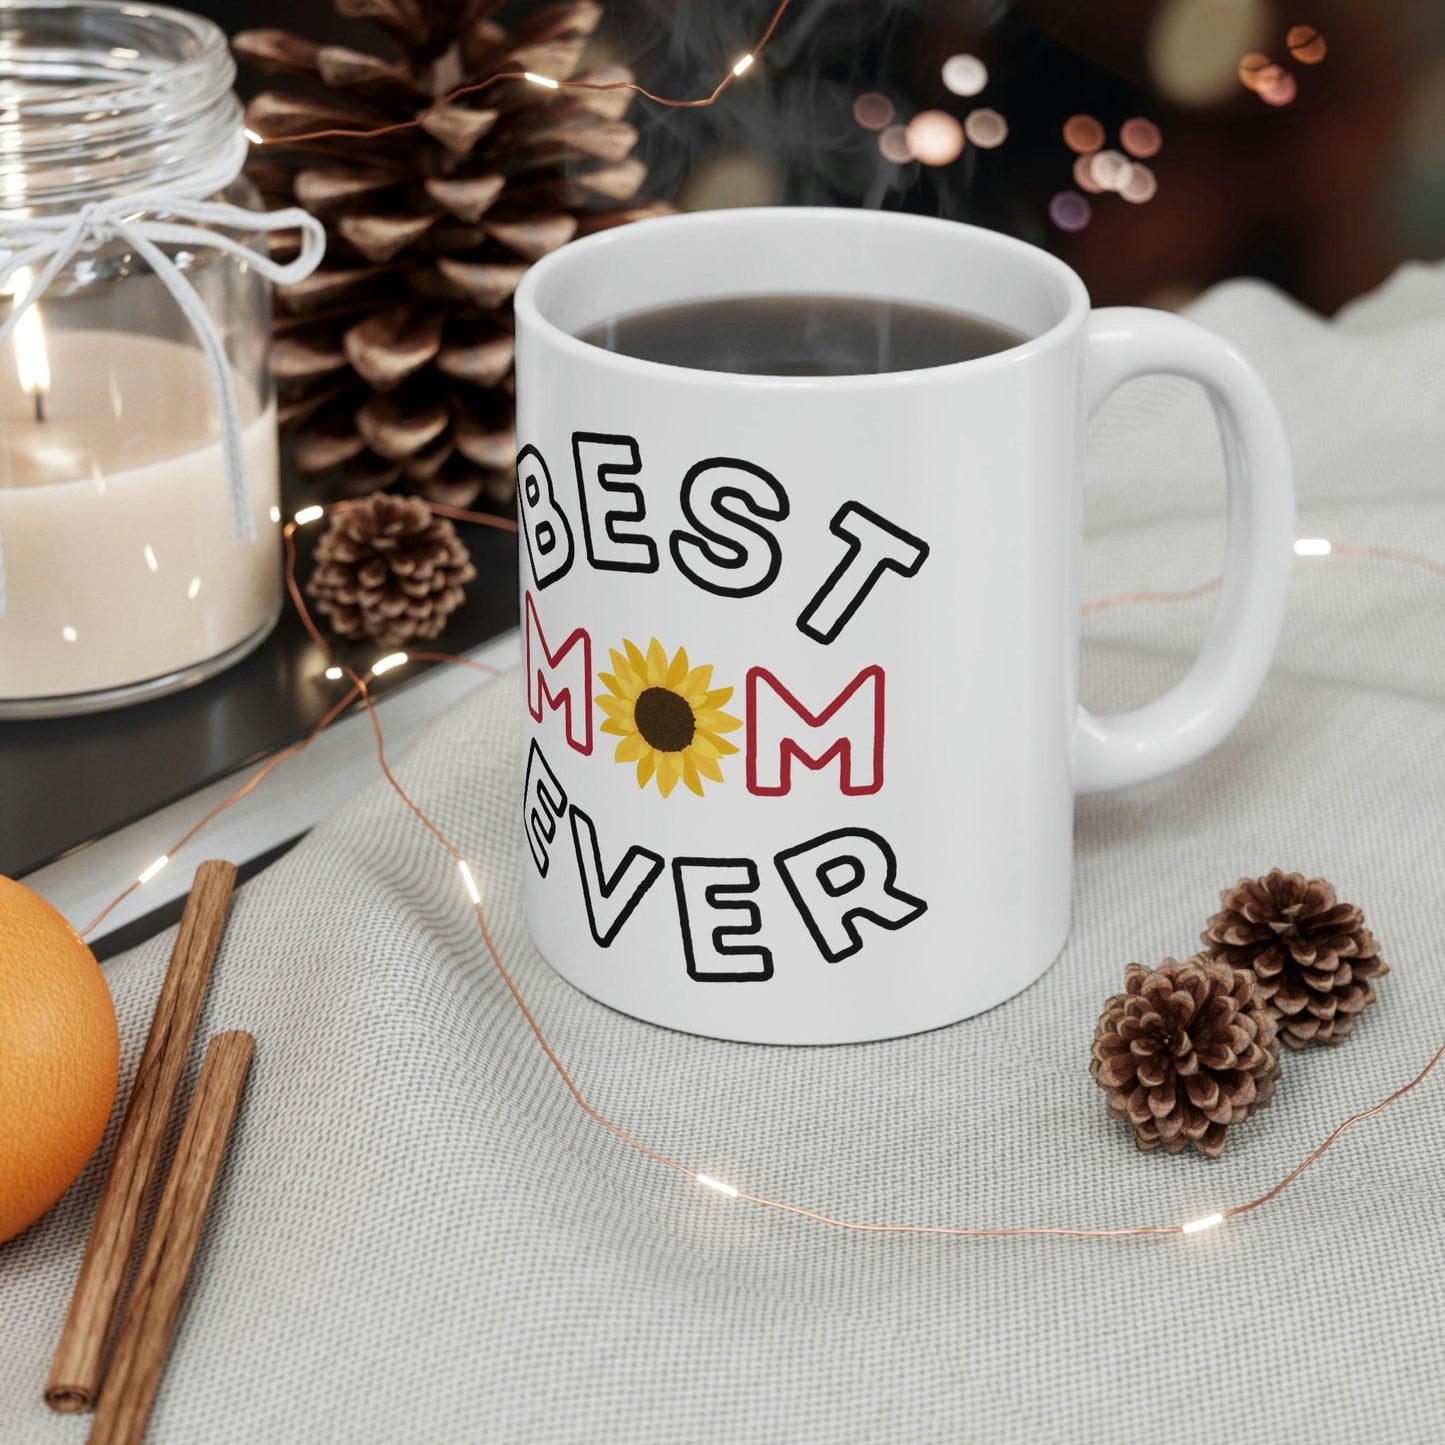 Best Mom Ever Mug, gift for mom on mothers day, Birthday gift for mom, gift for her, coffee mug for her, hot cocoa mug, gift for coffee lover - Giftsmojo